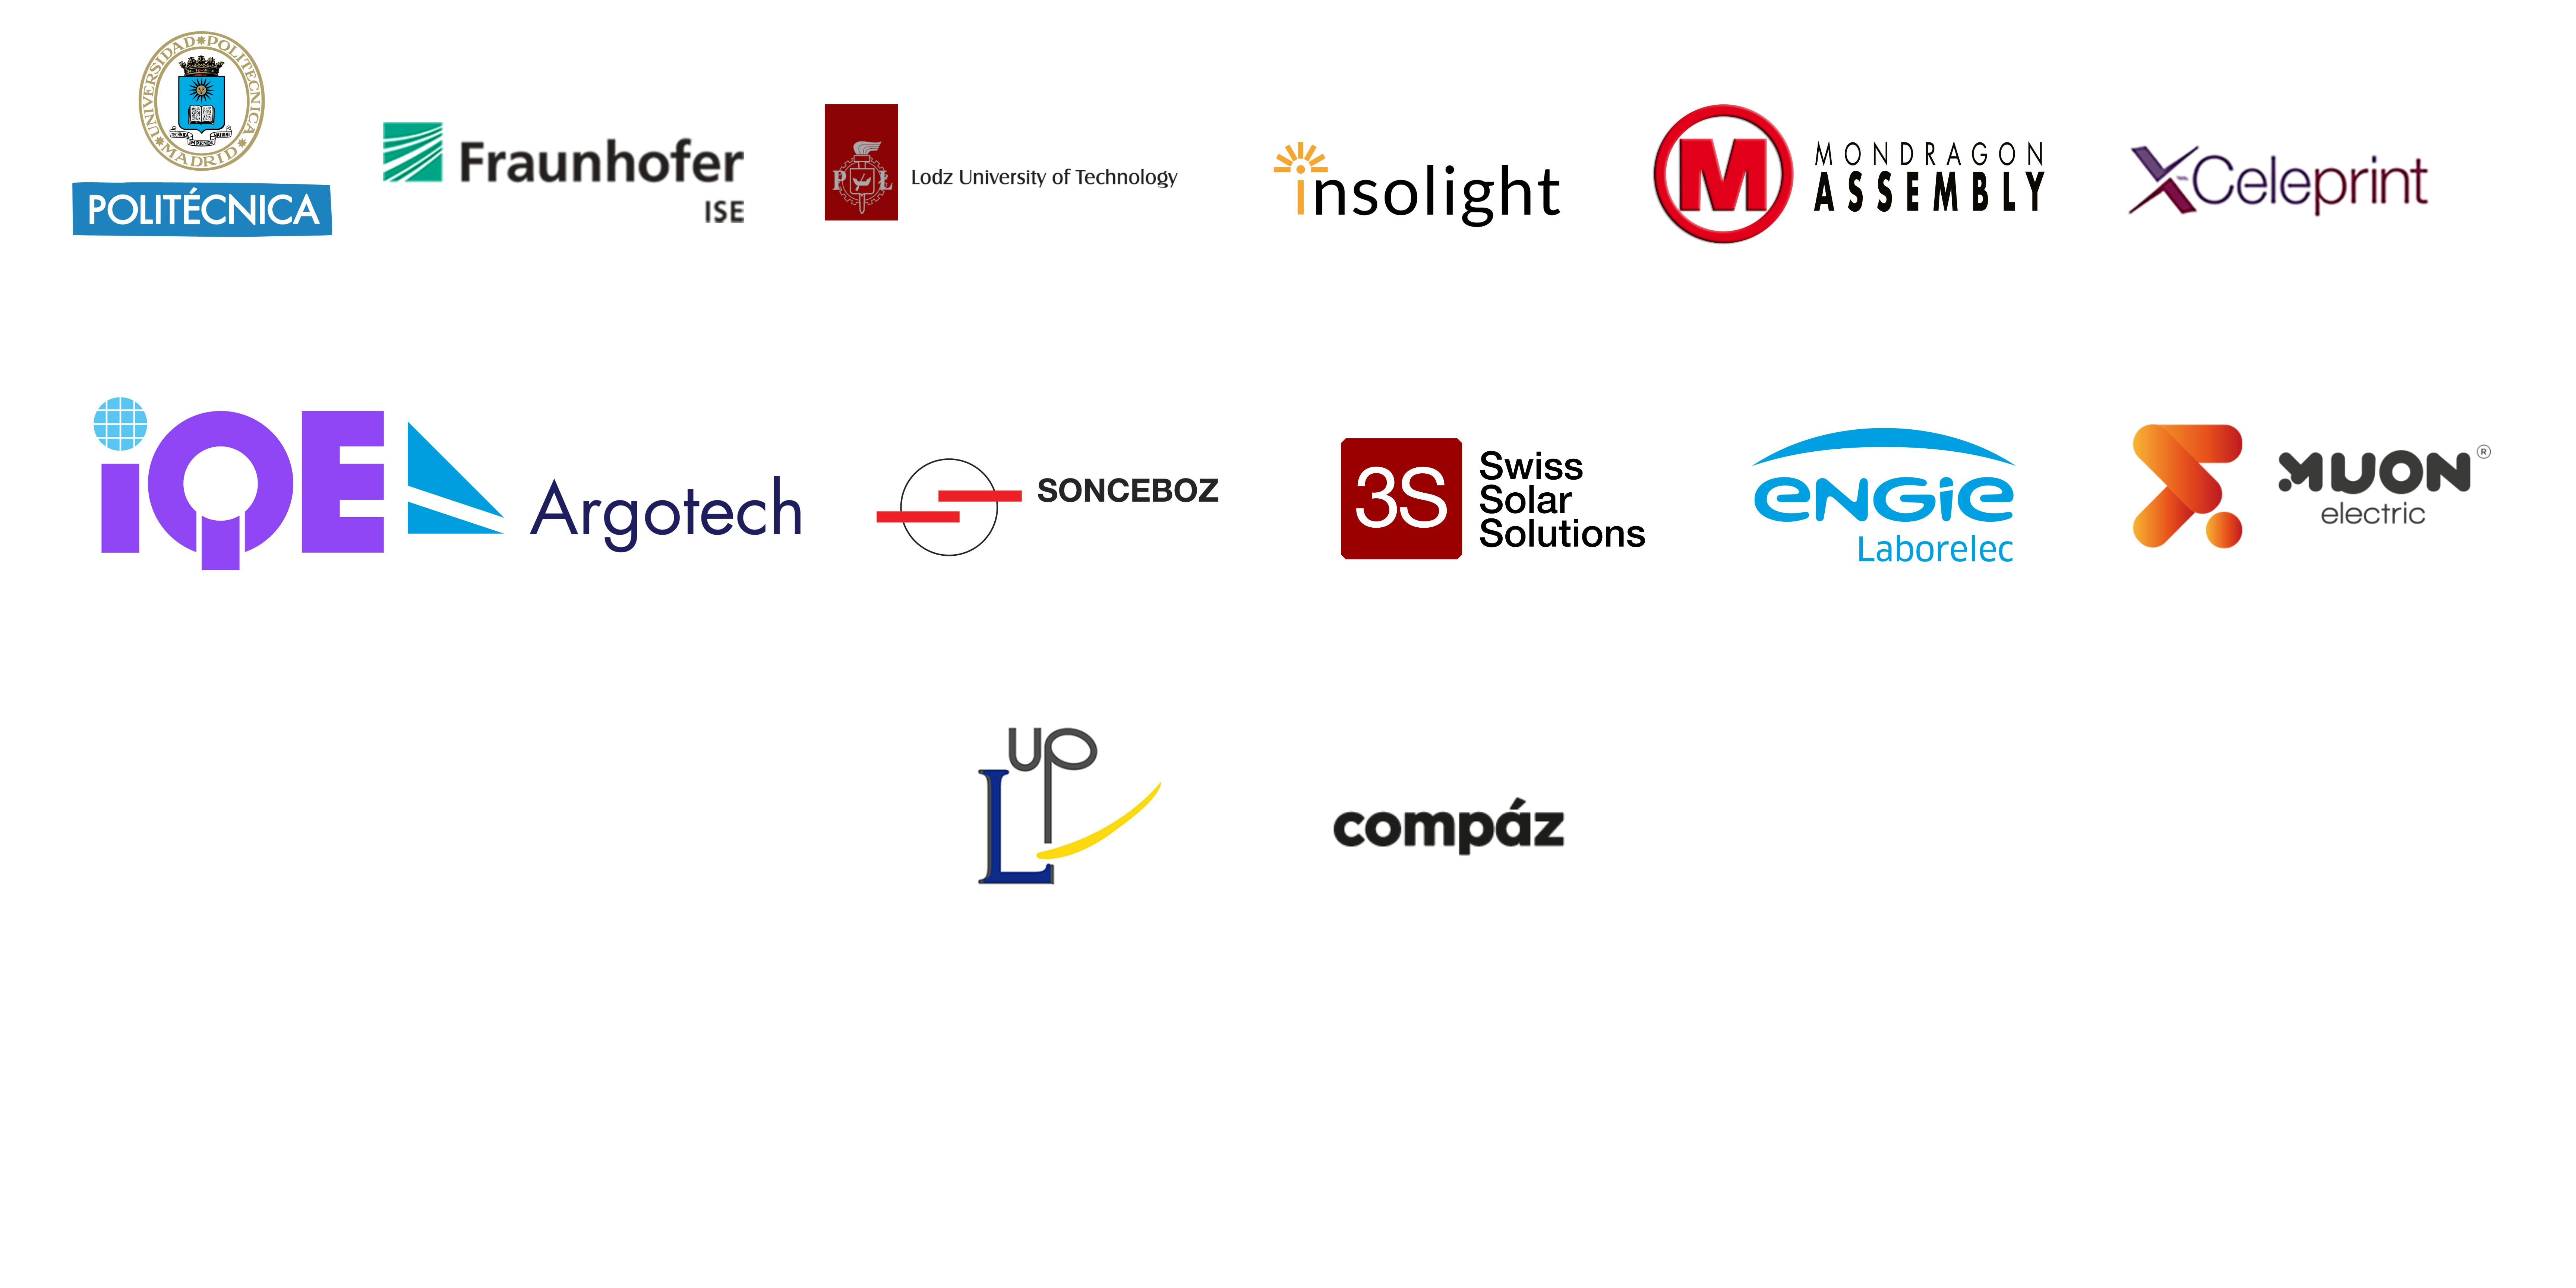 Thanks to our partners: